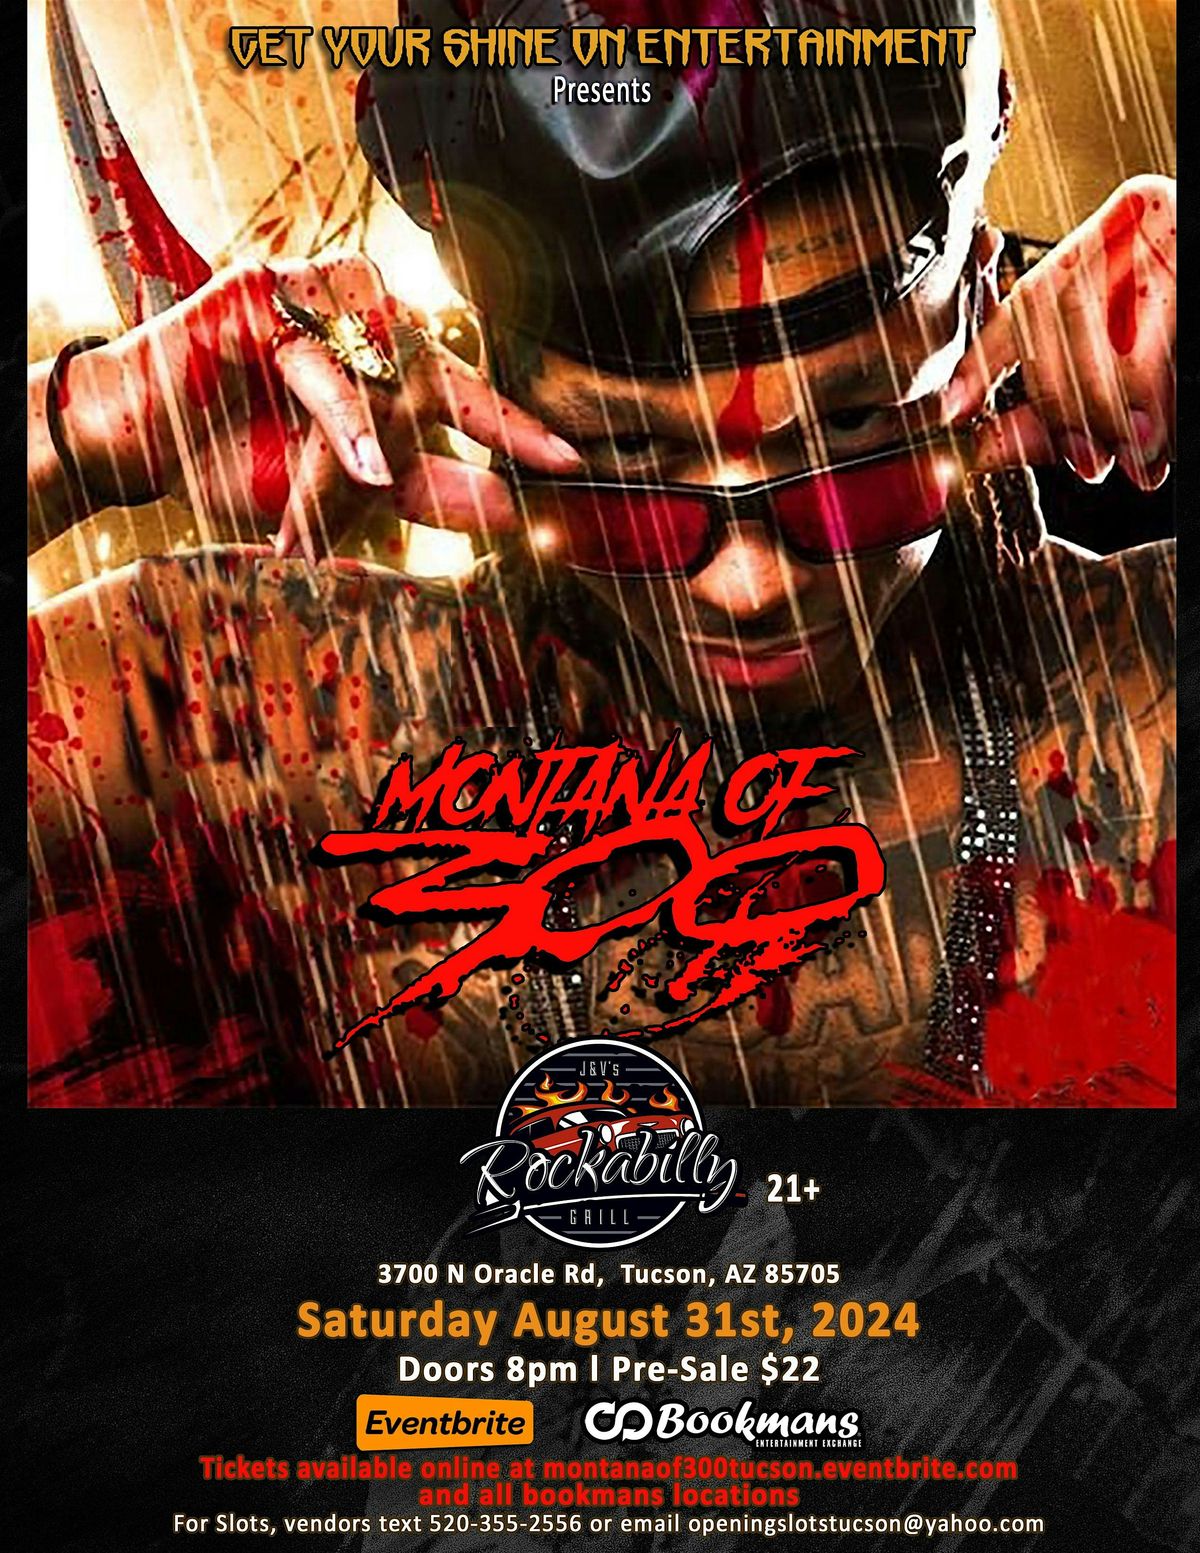 Montana of 300 live Saturday August 31st in Tucson@Rockabilly's All Ages